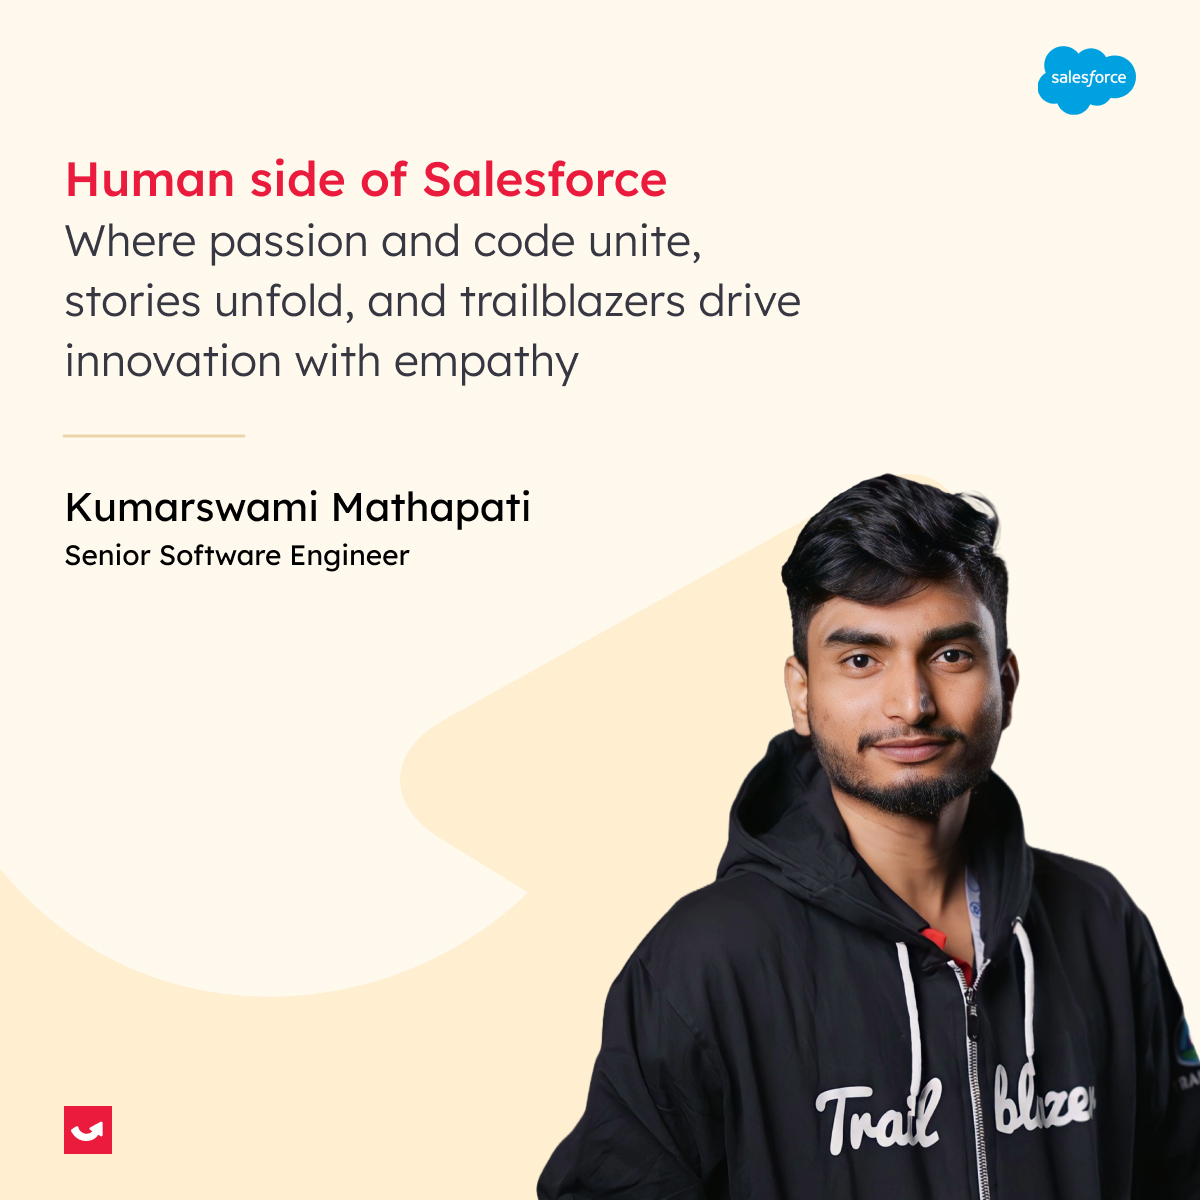 Meet @MathpatiKumar, the epitome of innovation in the #Salesforce realm From a chance encounter to becoming a #SalesforceTrailblazer, his journey is a testament to determination & community support. Check out his story in just 3 minutes bit.ly/3O6aRHN @SaasguruHQ